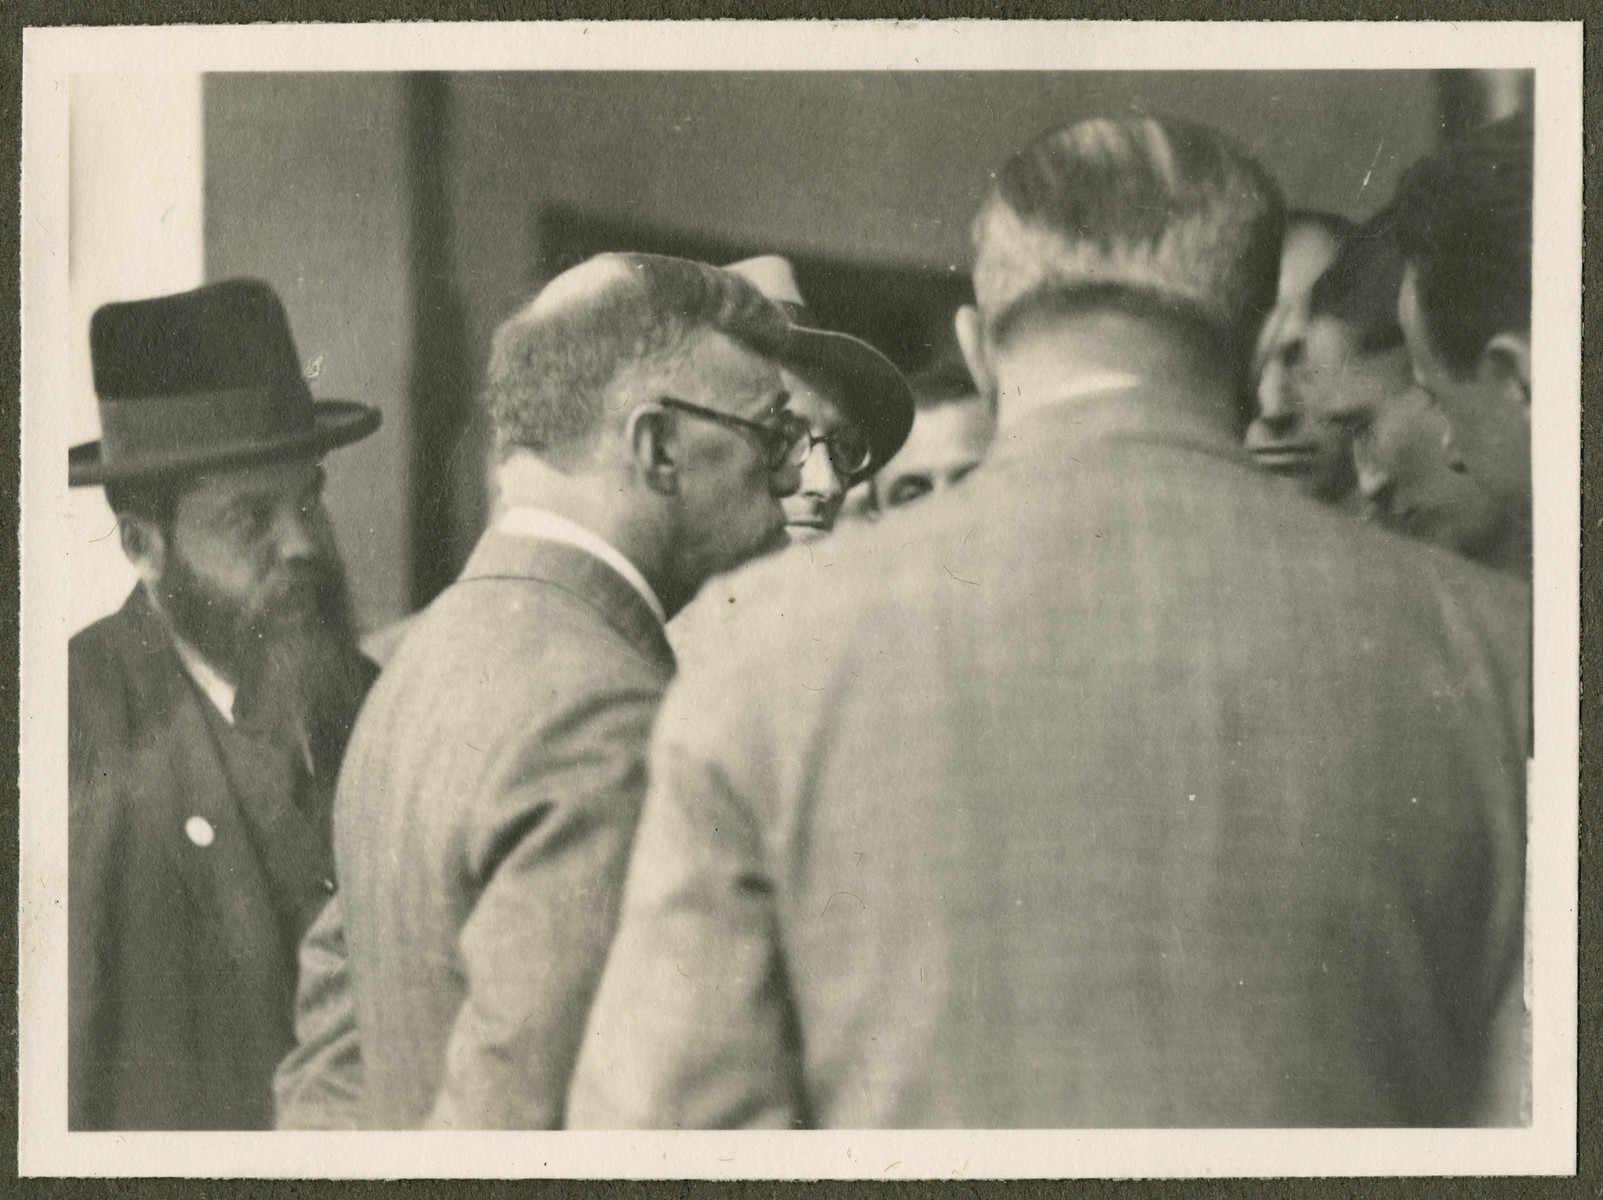 Zev Jabotinsky speaks to a group of men probably during the 18th Zionist Congress.